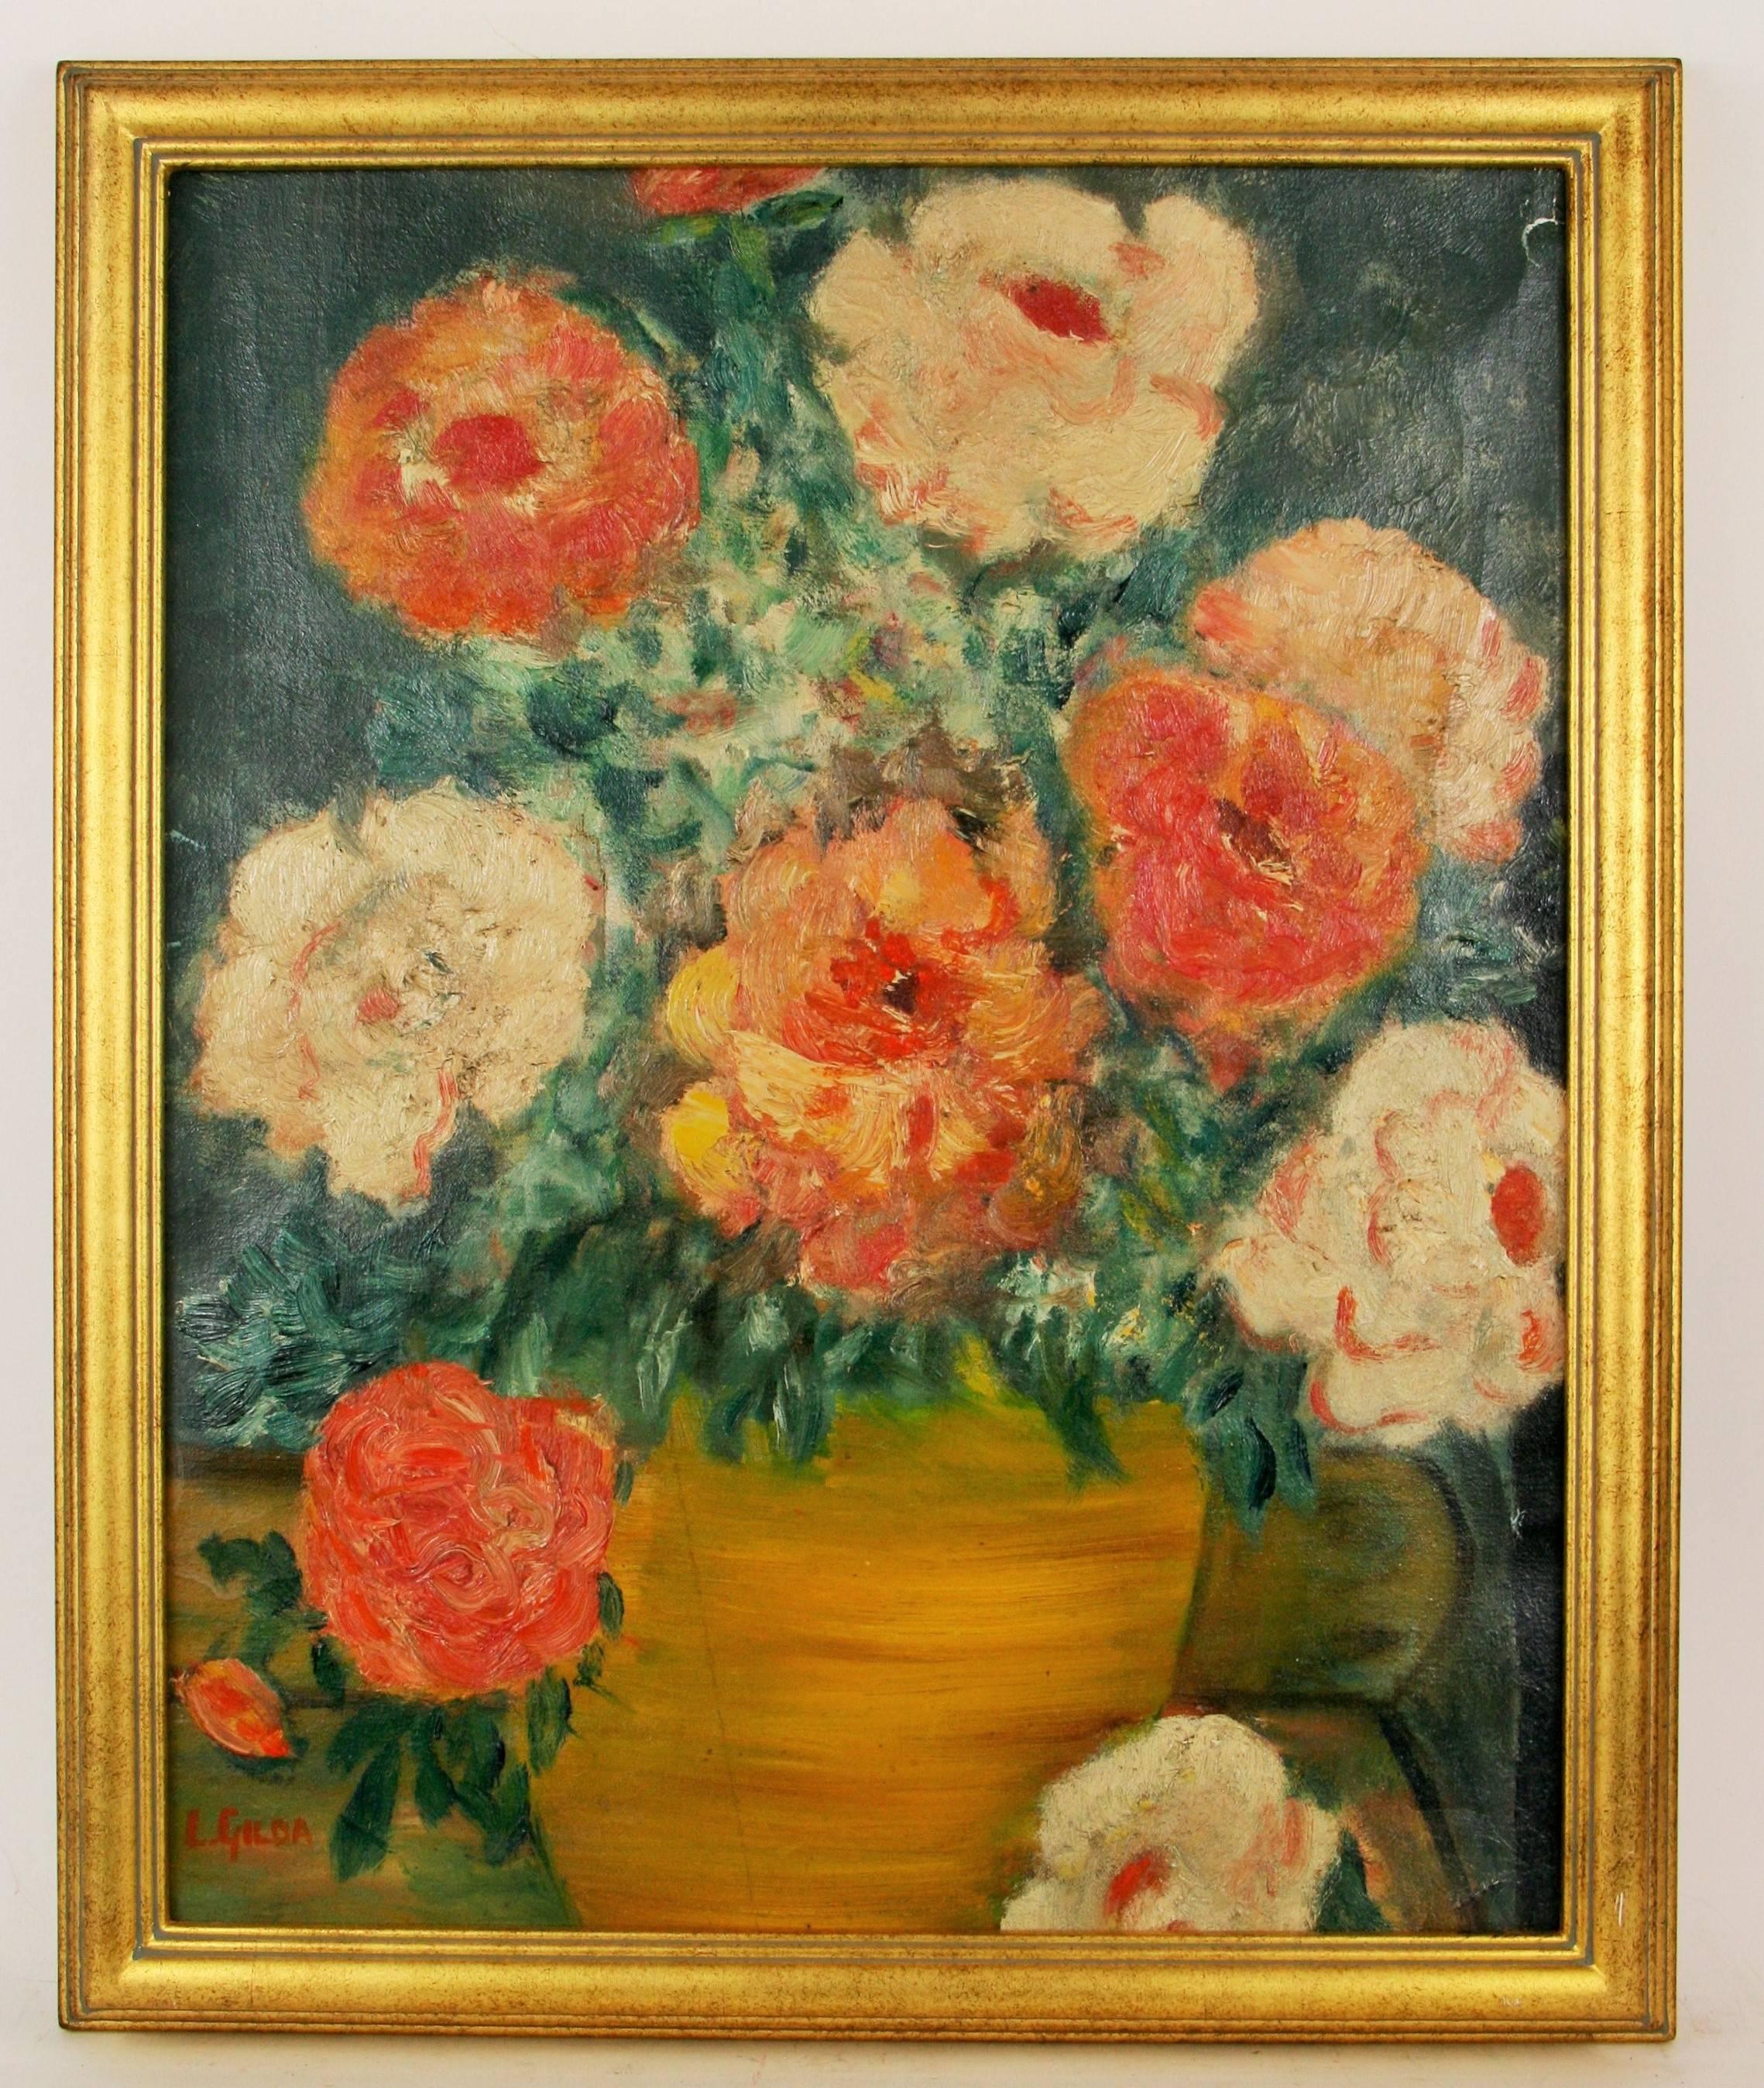 #5-2736b an Impressionistic style flowers still life, original oil on artist board, signed lower left by L.Gilda. Displayed in a wood gilt frame. Image size: 19.5 H x 15.5 W.